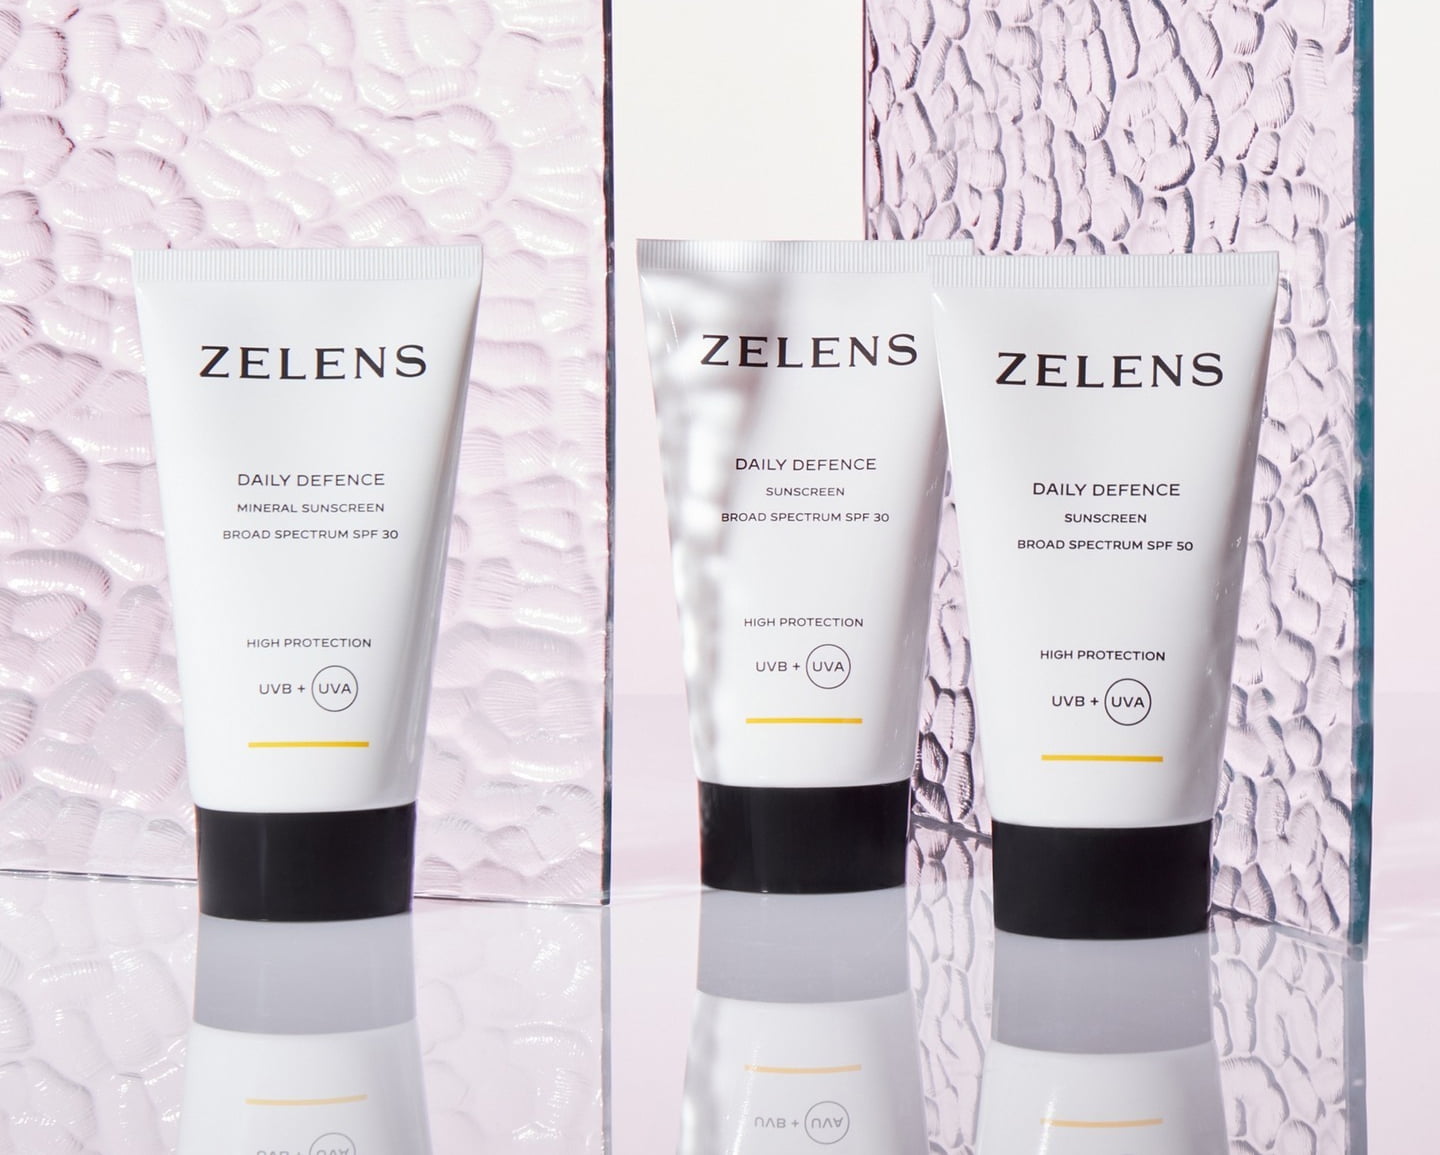 New launches from Zelens